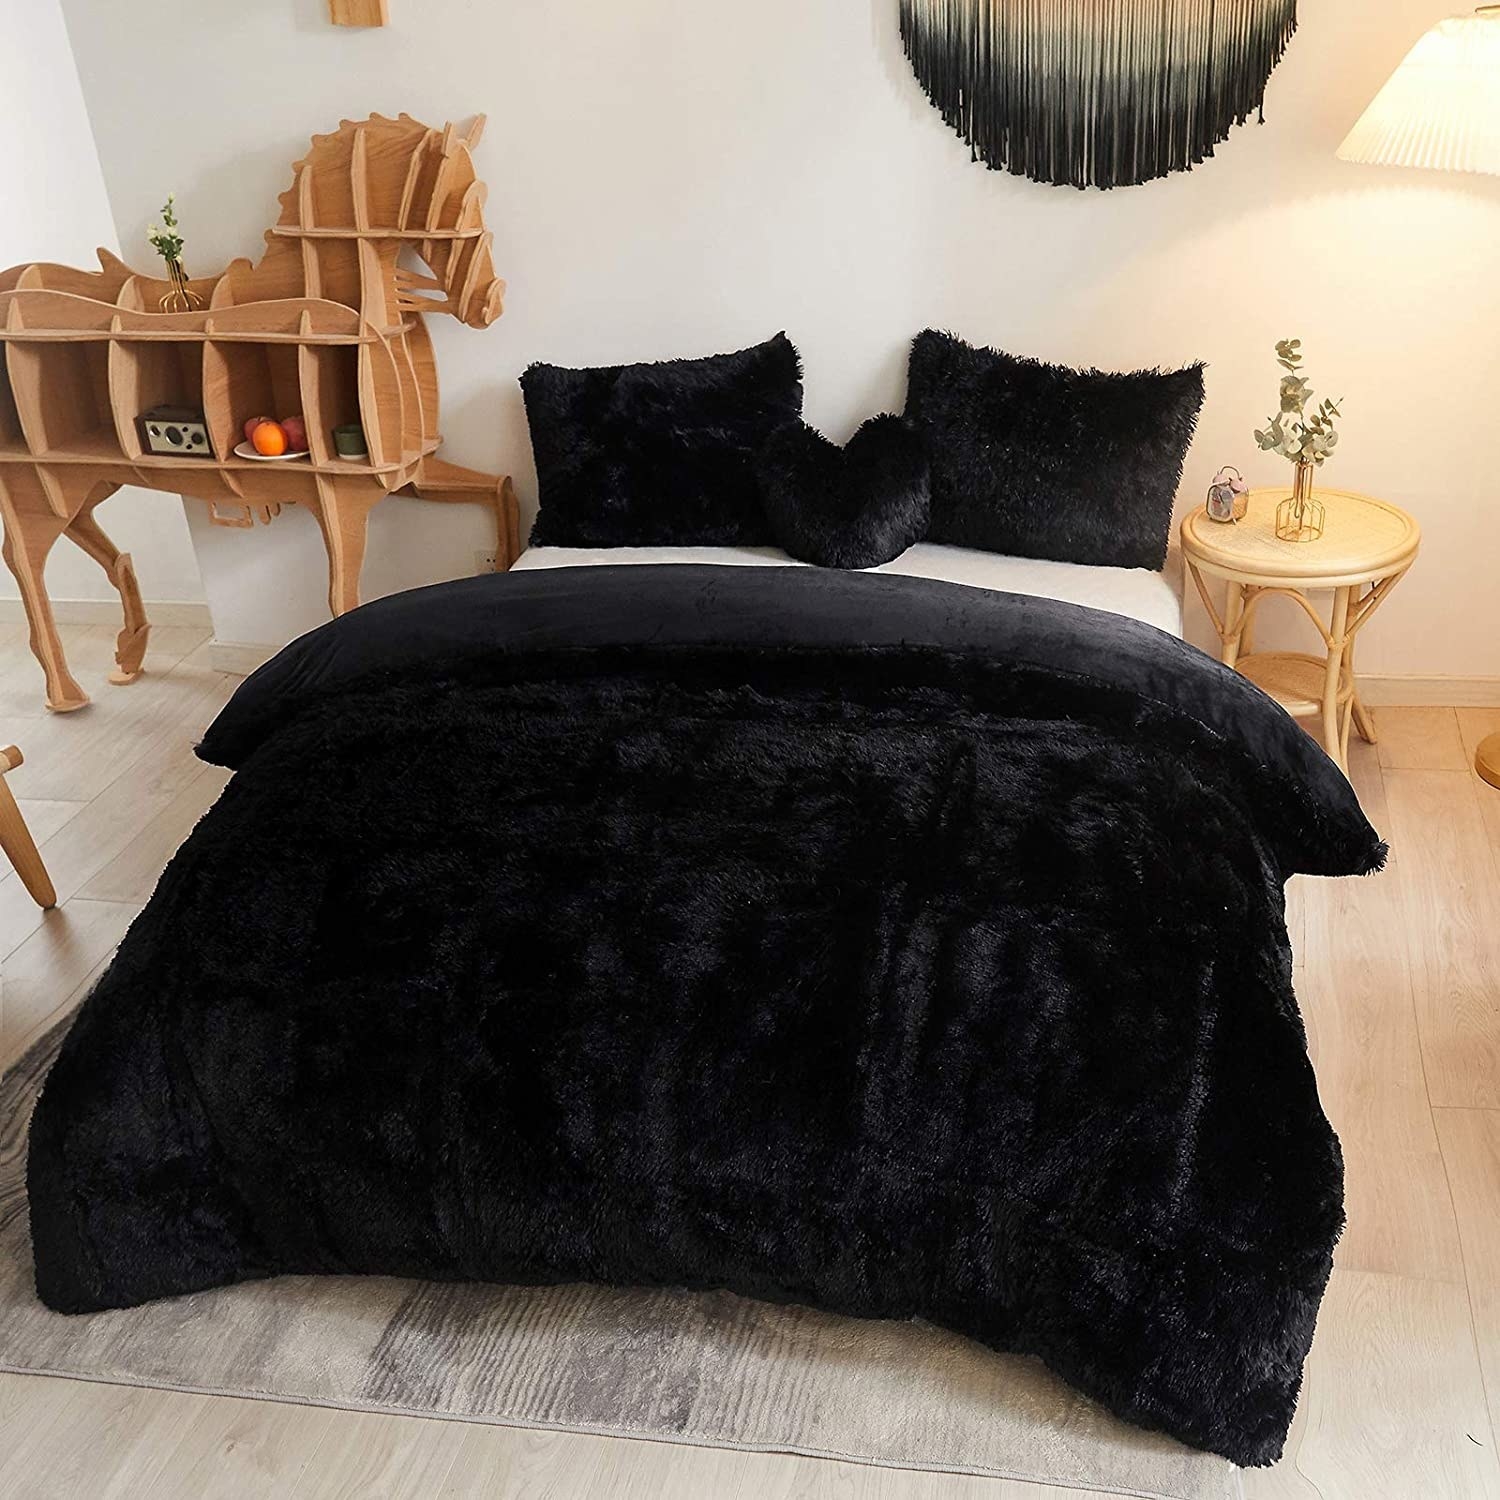 Black duvet with matching pillow cases in fluffy material 